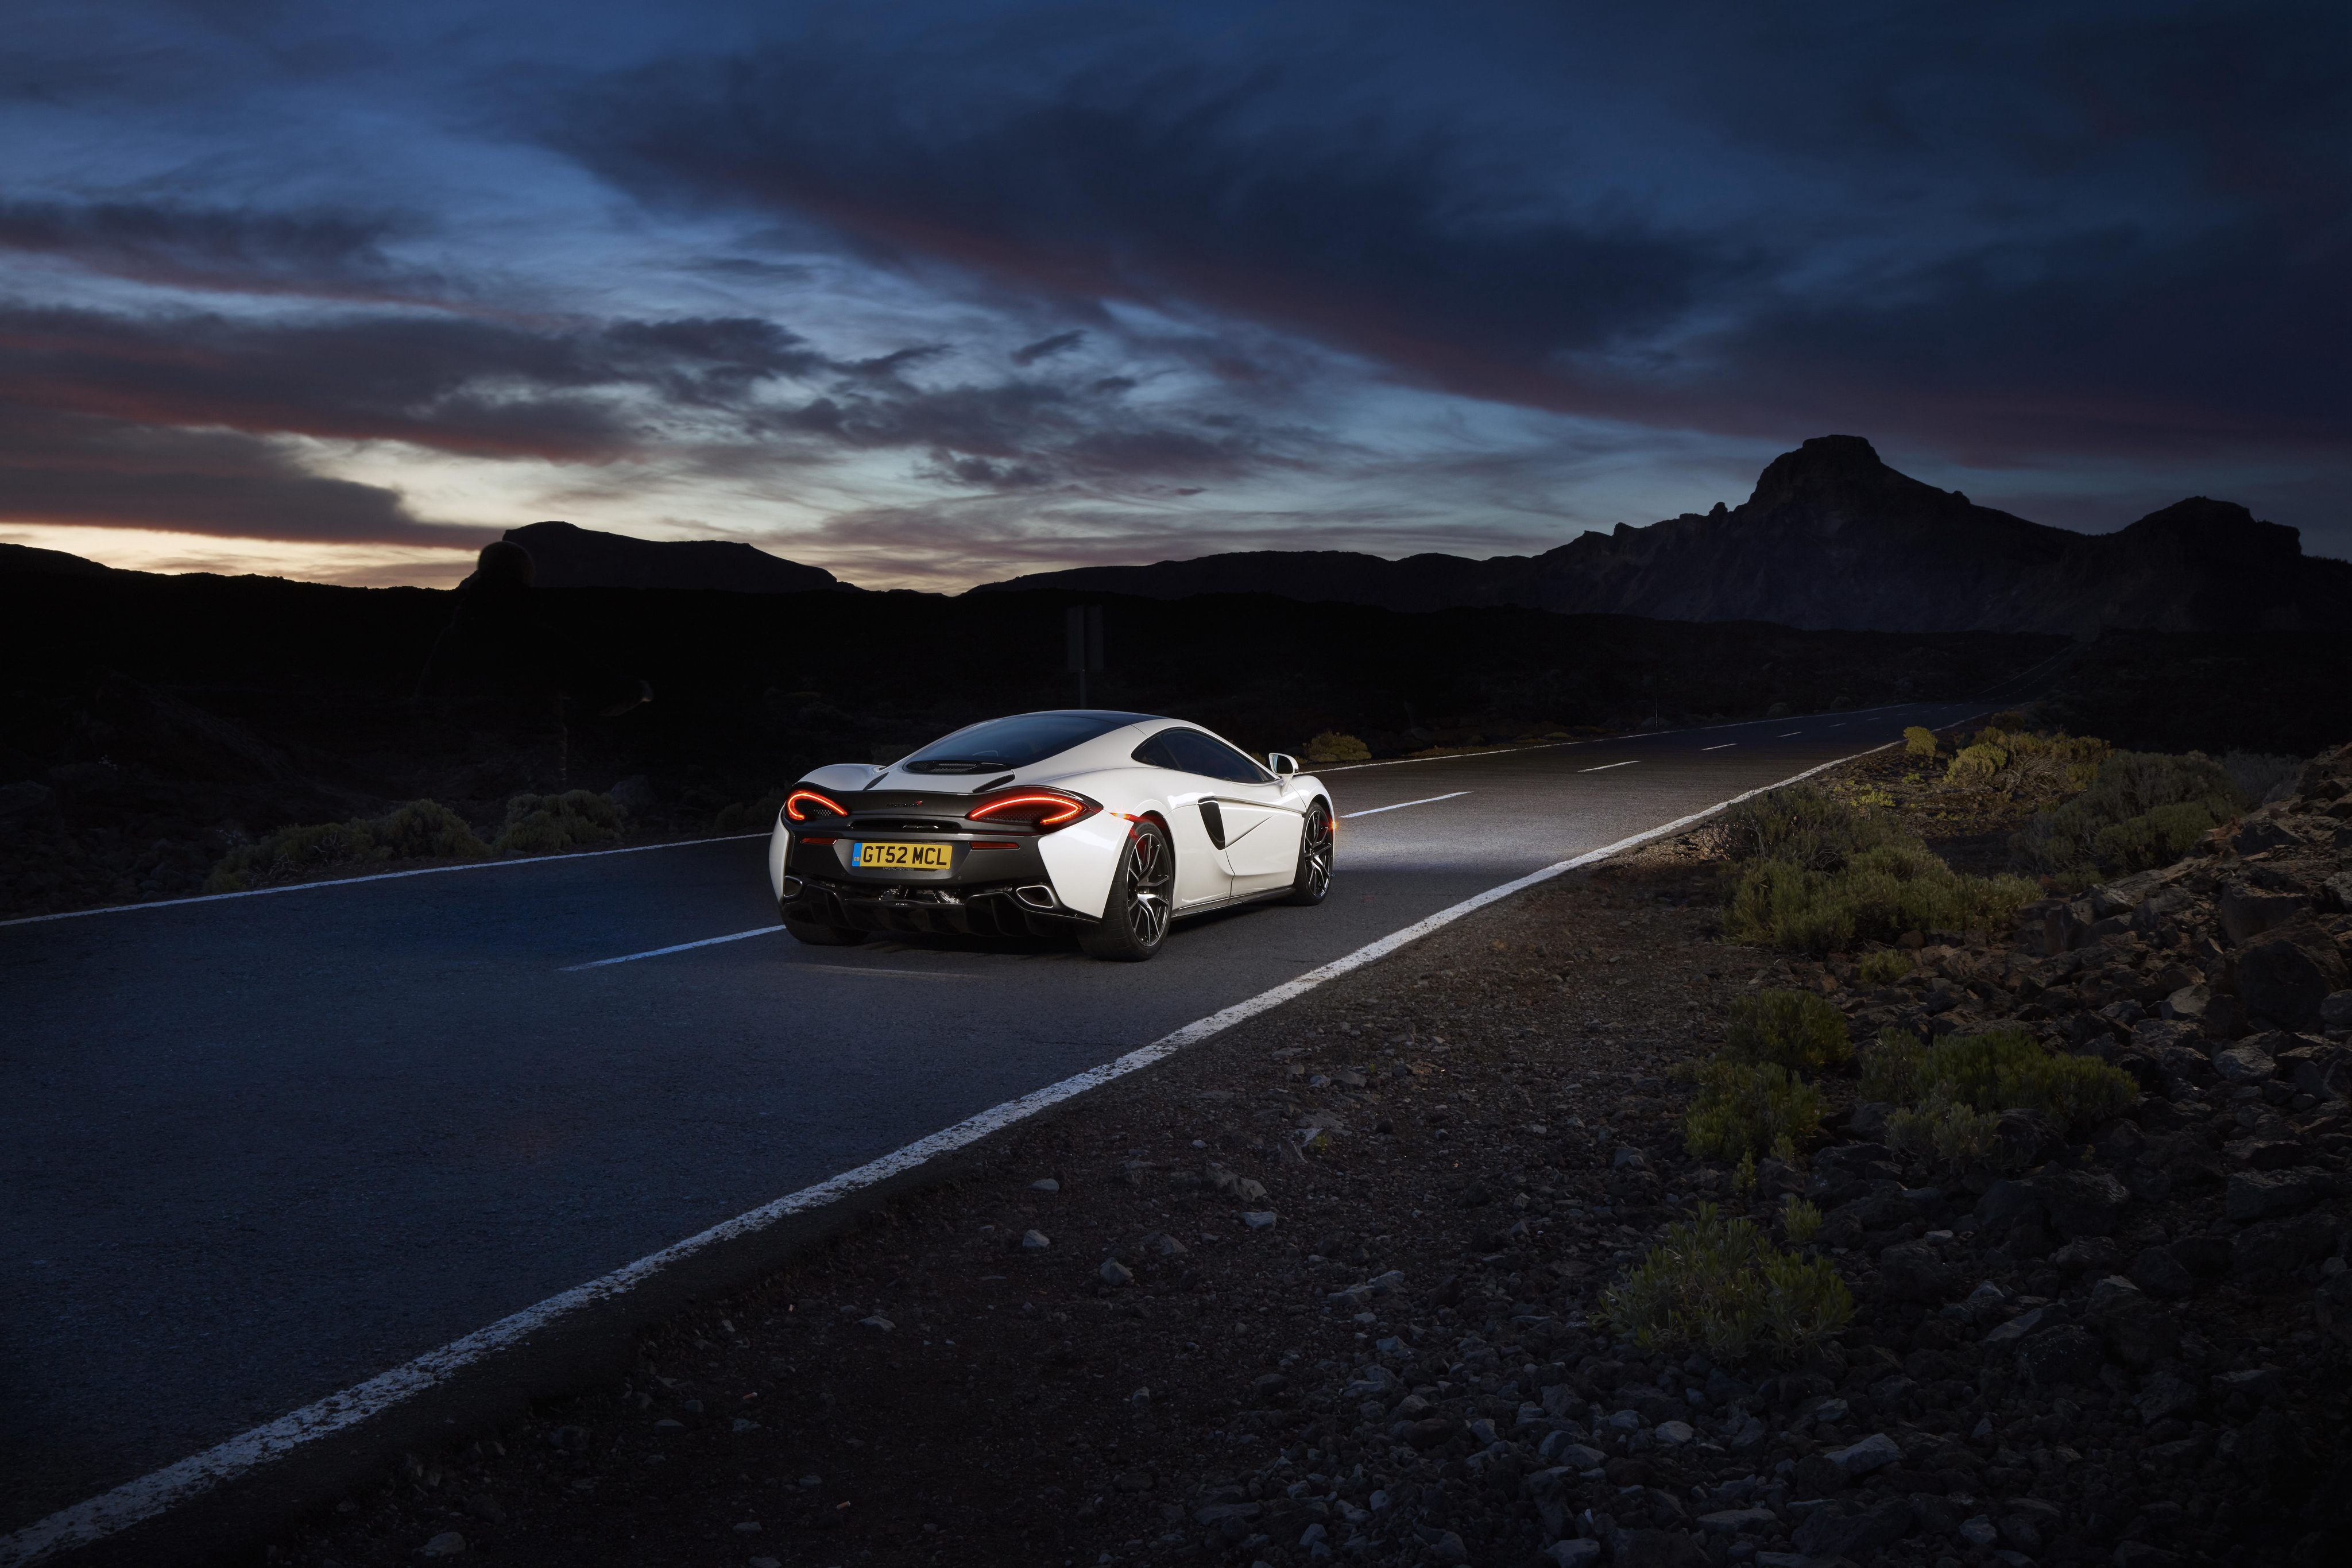 mclaren, supercar, rear view, night, cars, road, back view, 570gt